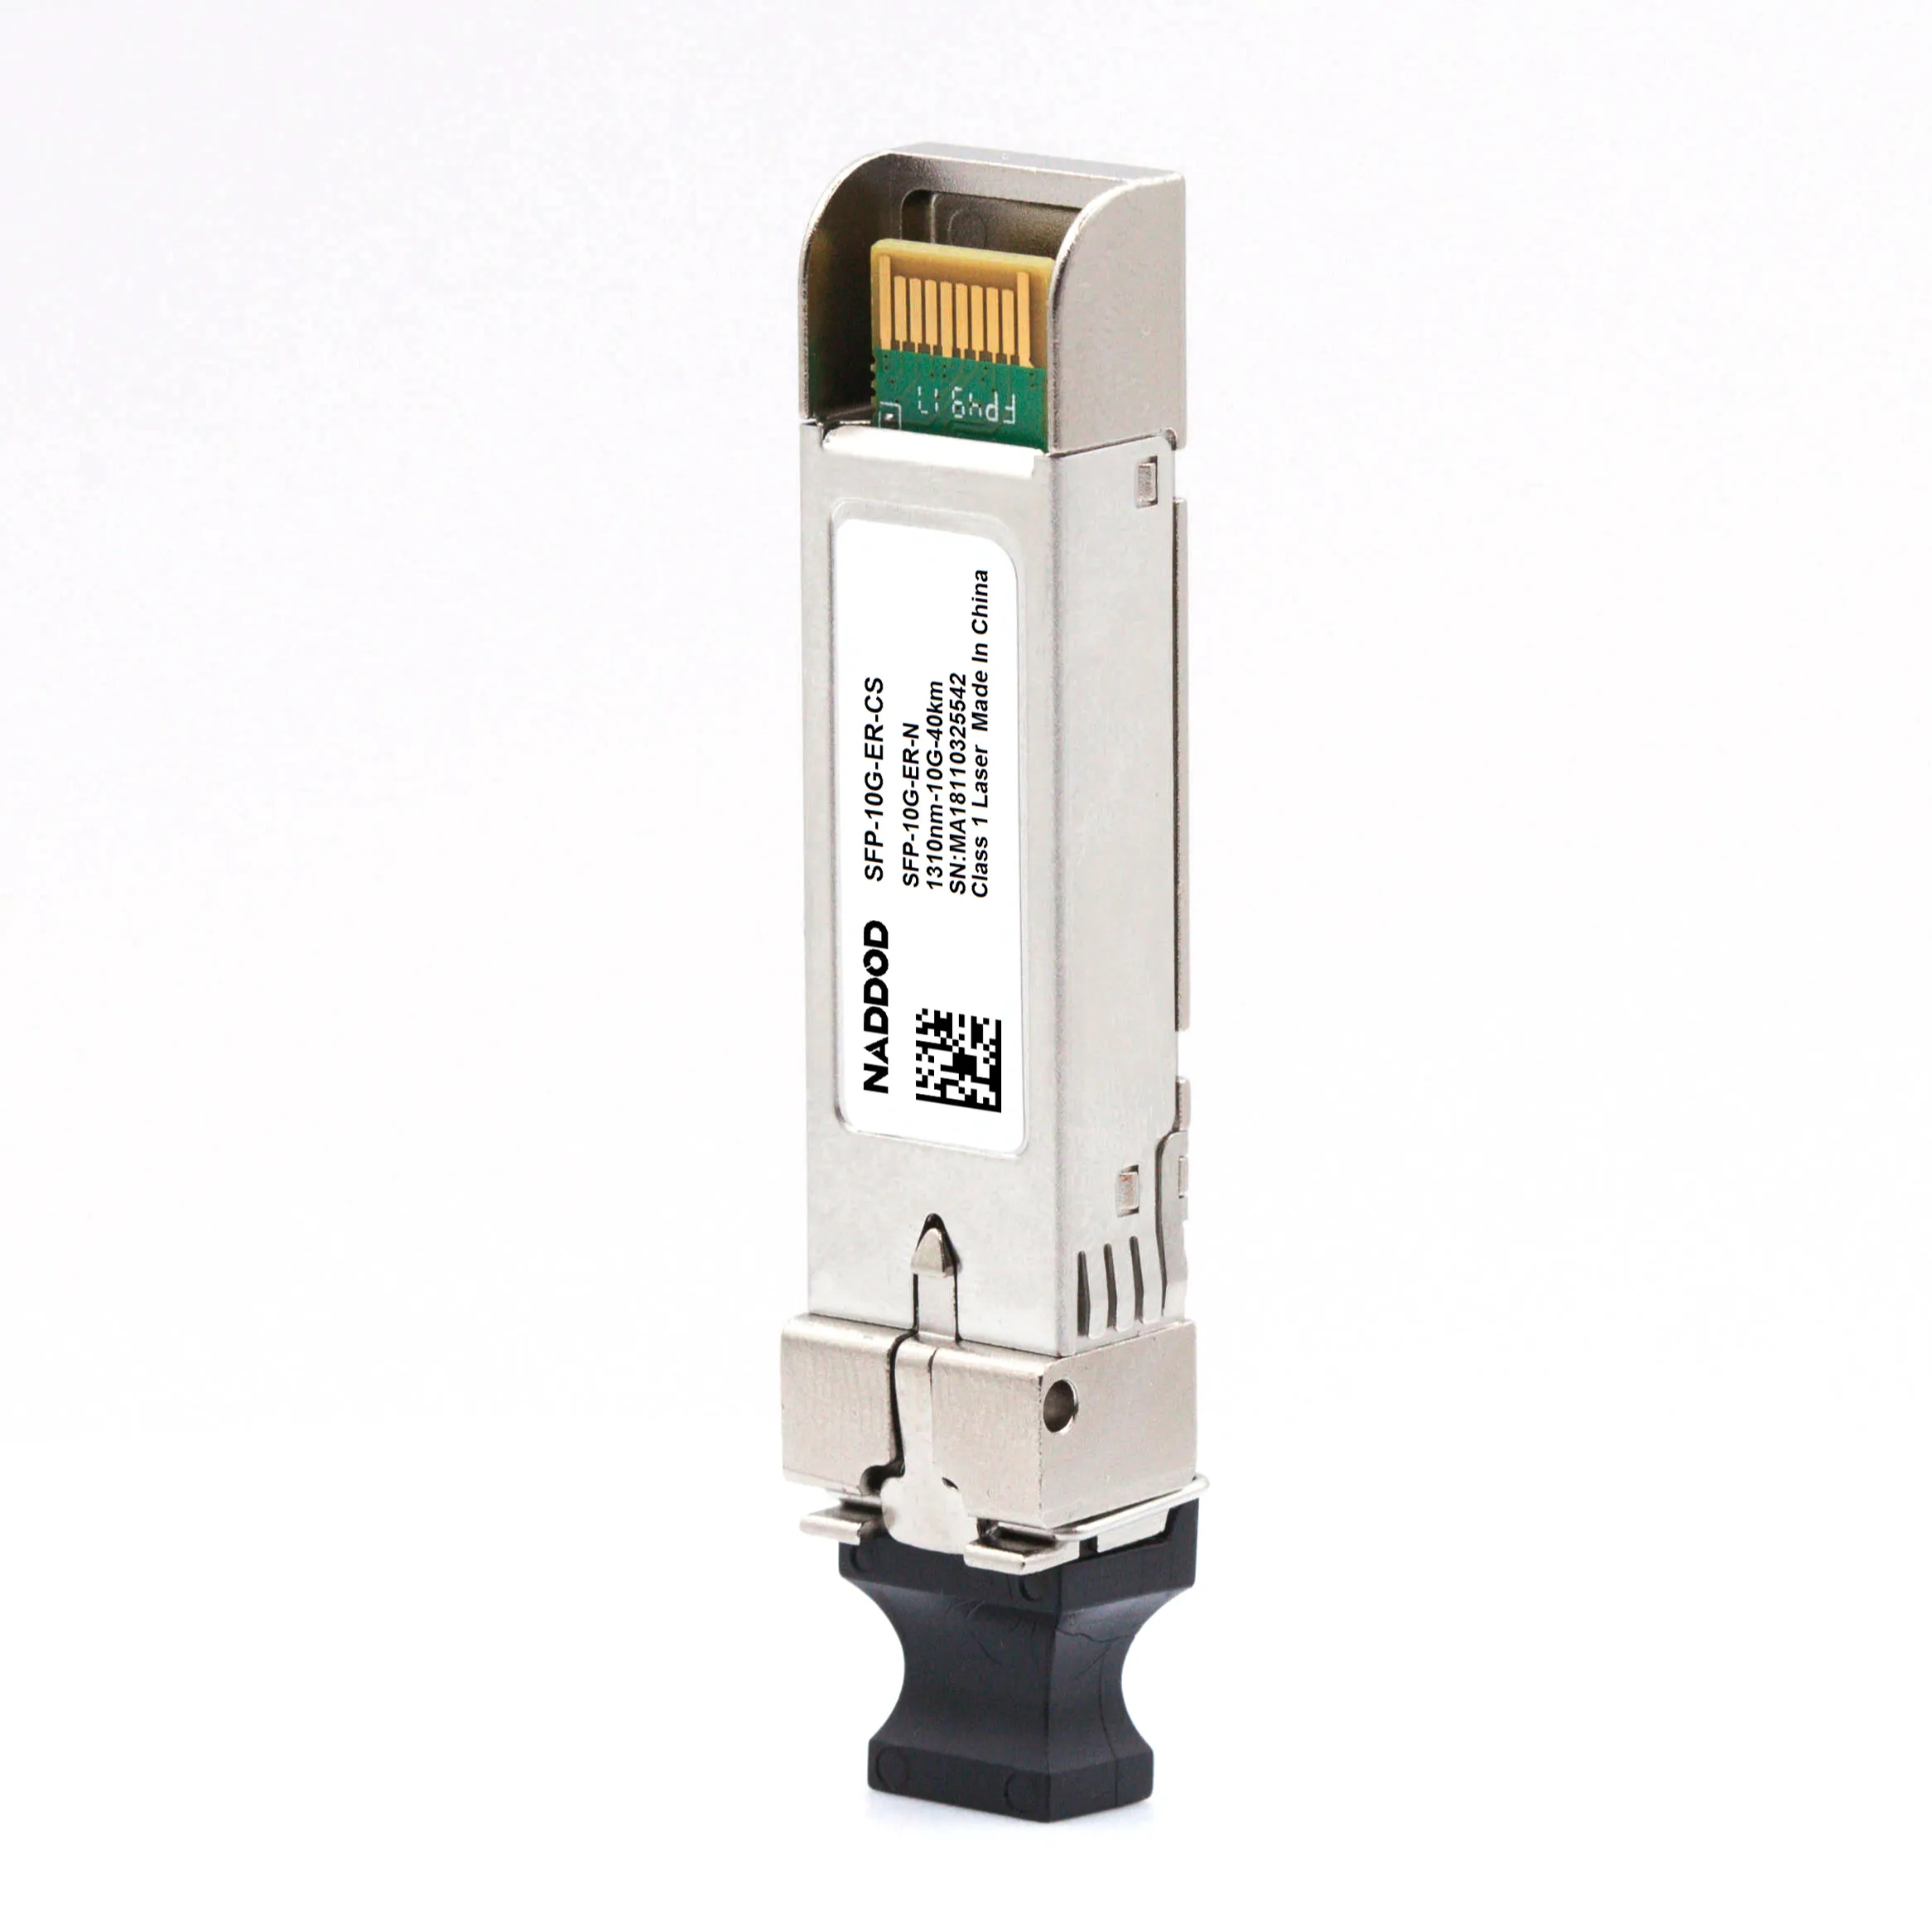 Sfp-10g ER Compatible With Huawei Hp 10g Sfp+ Transceiver 1310nm 40km Optical Hp Transceiver